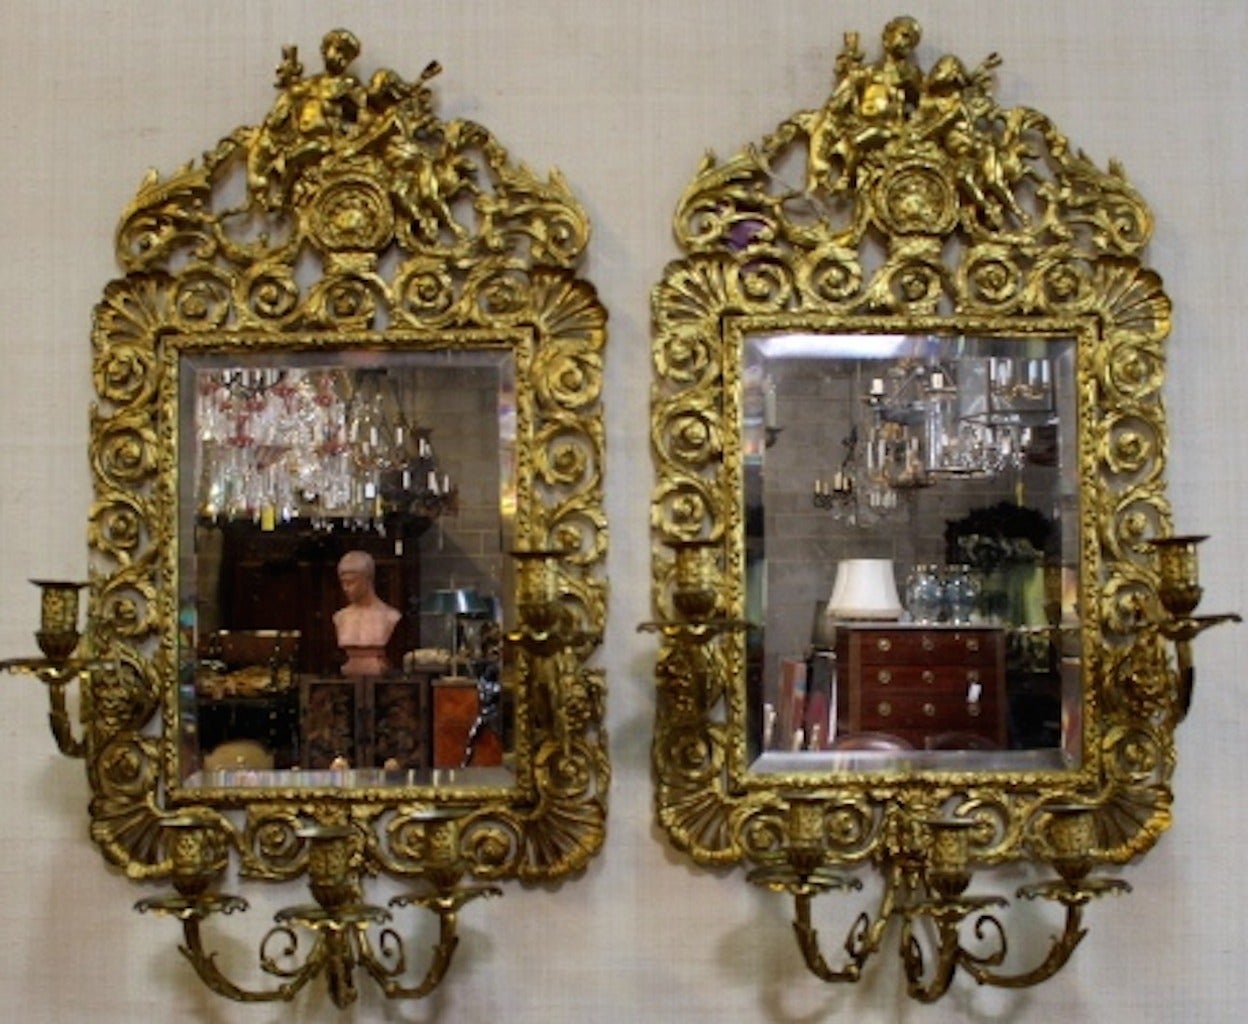 Pair of 19th century French Louis XVI style gilt bronze and mirrored five-arm wall sconces.